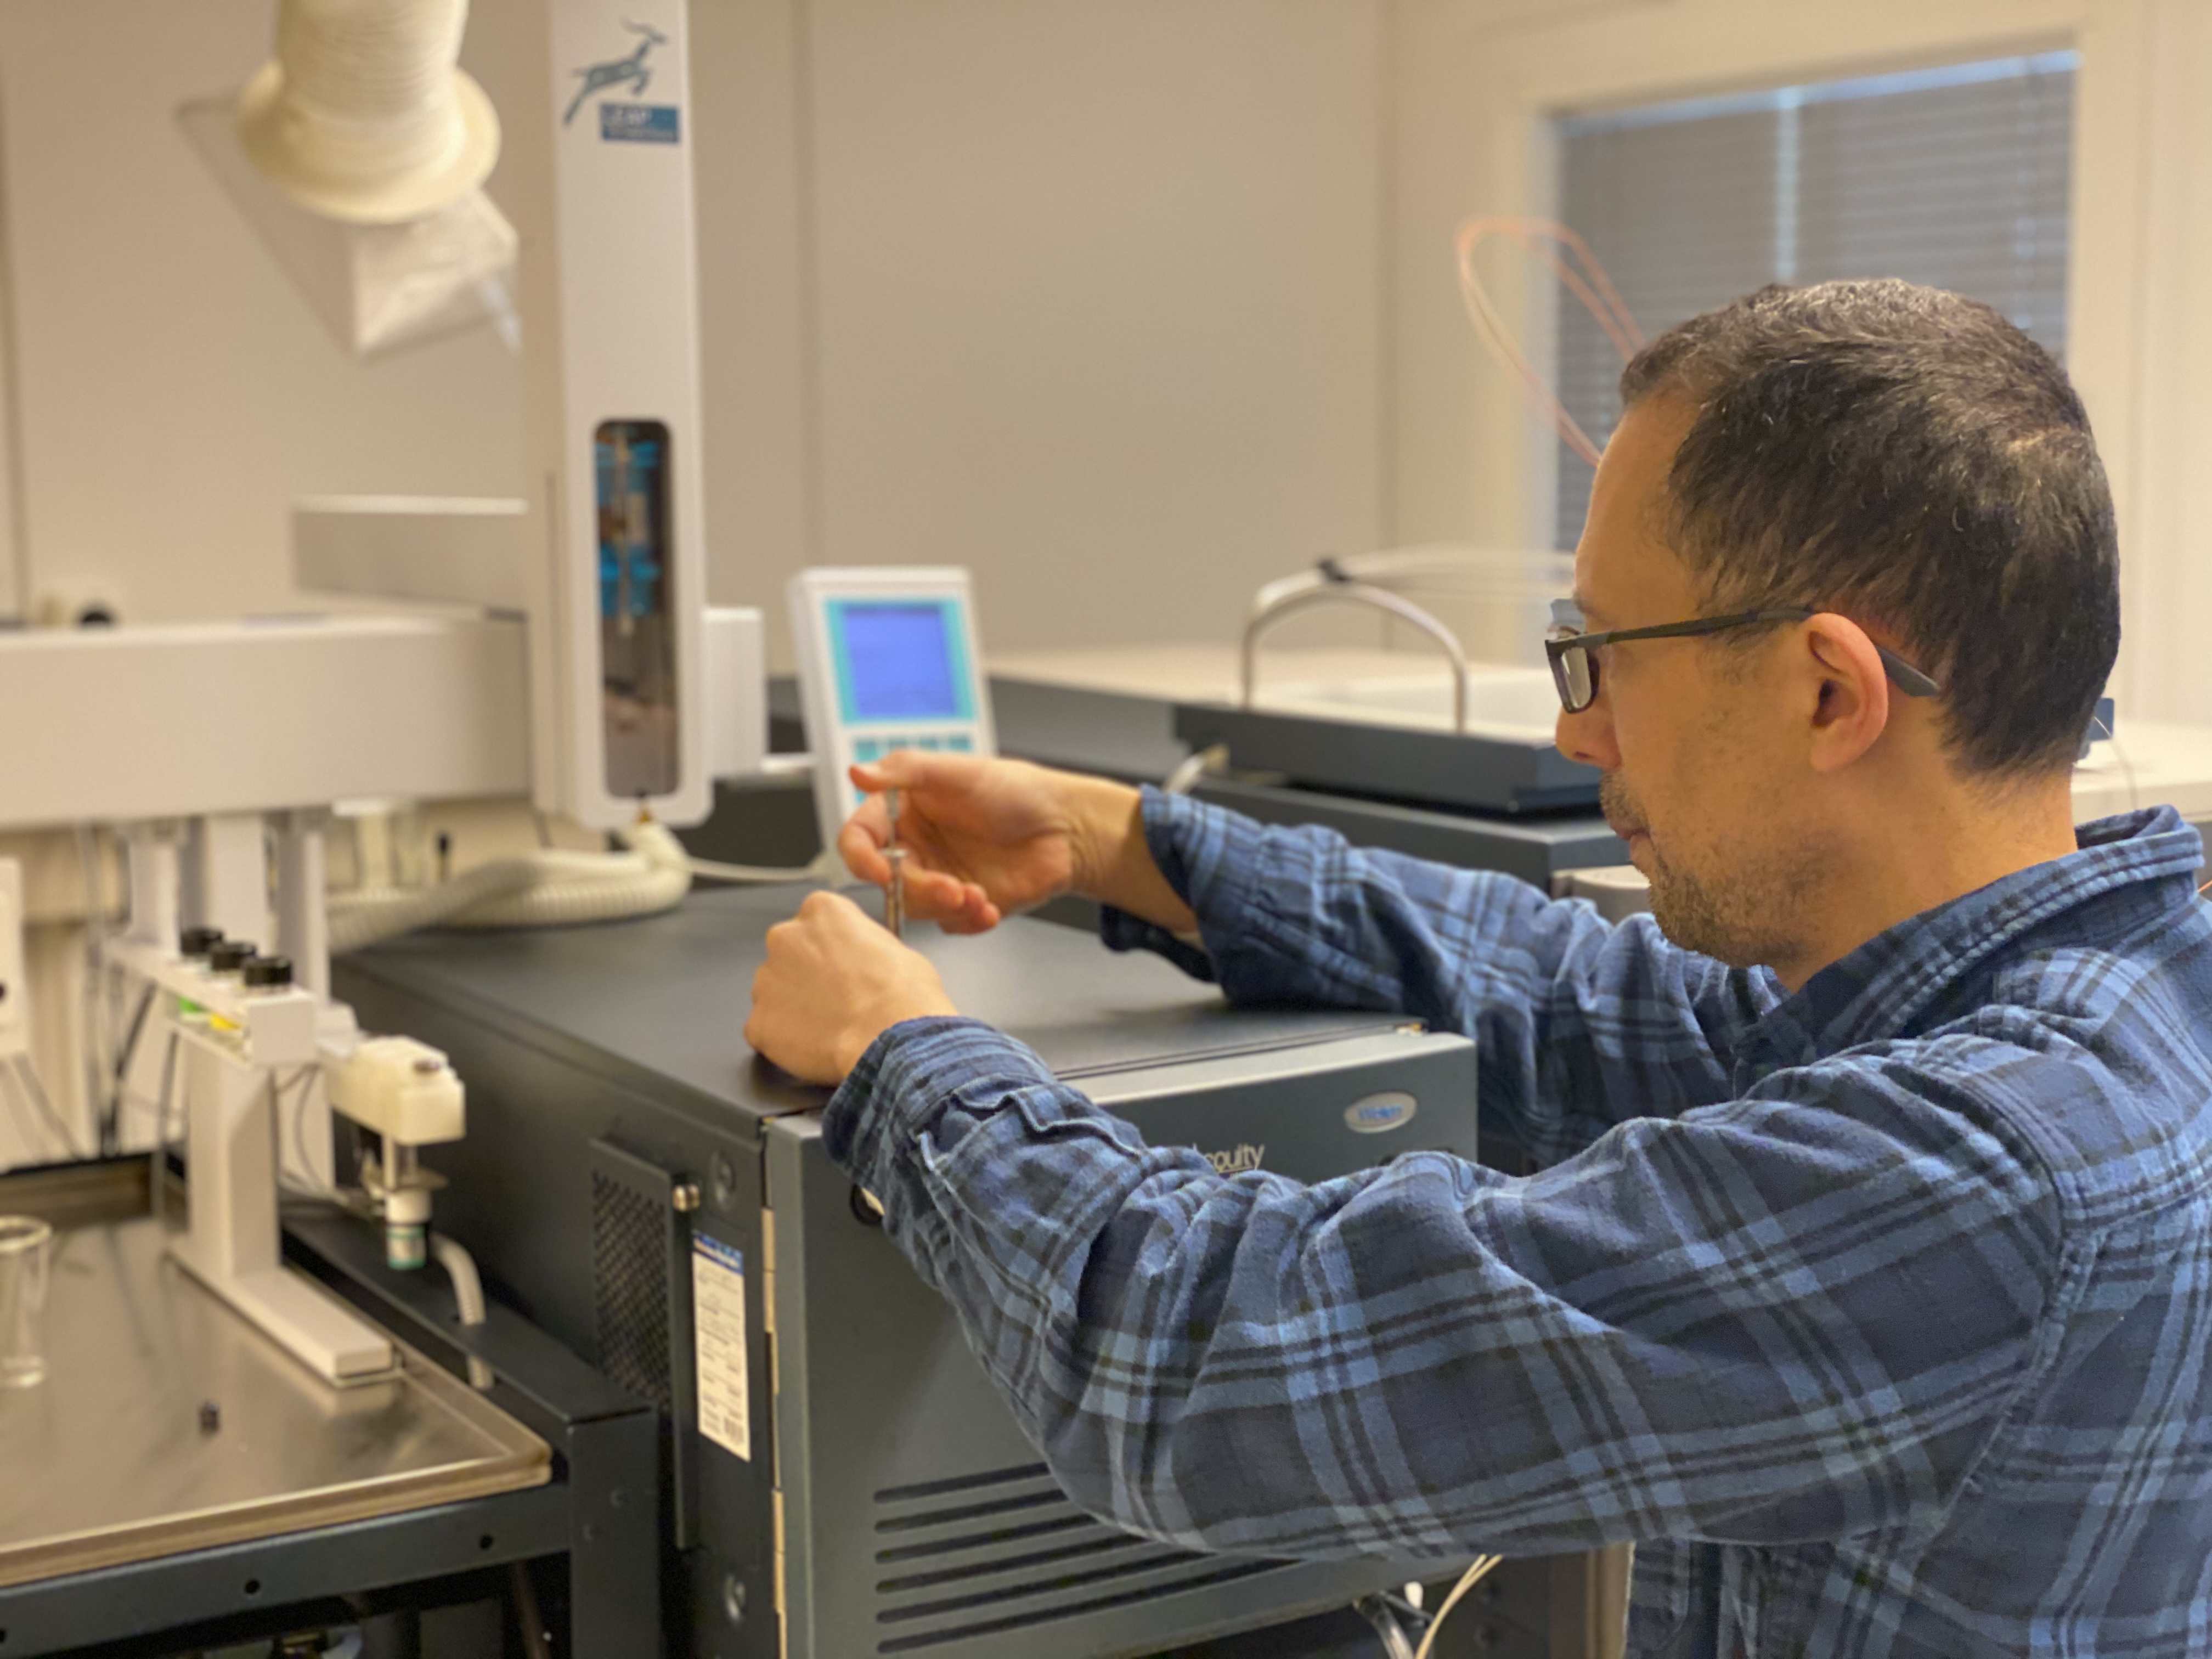 Dario Segura Peña wearing a blue plaid shirt and glasses and holding a syringe on top of the mass spectrometry instrument